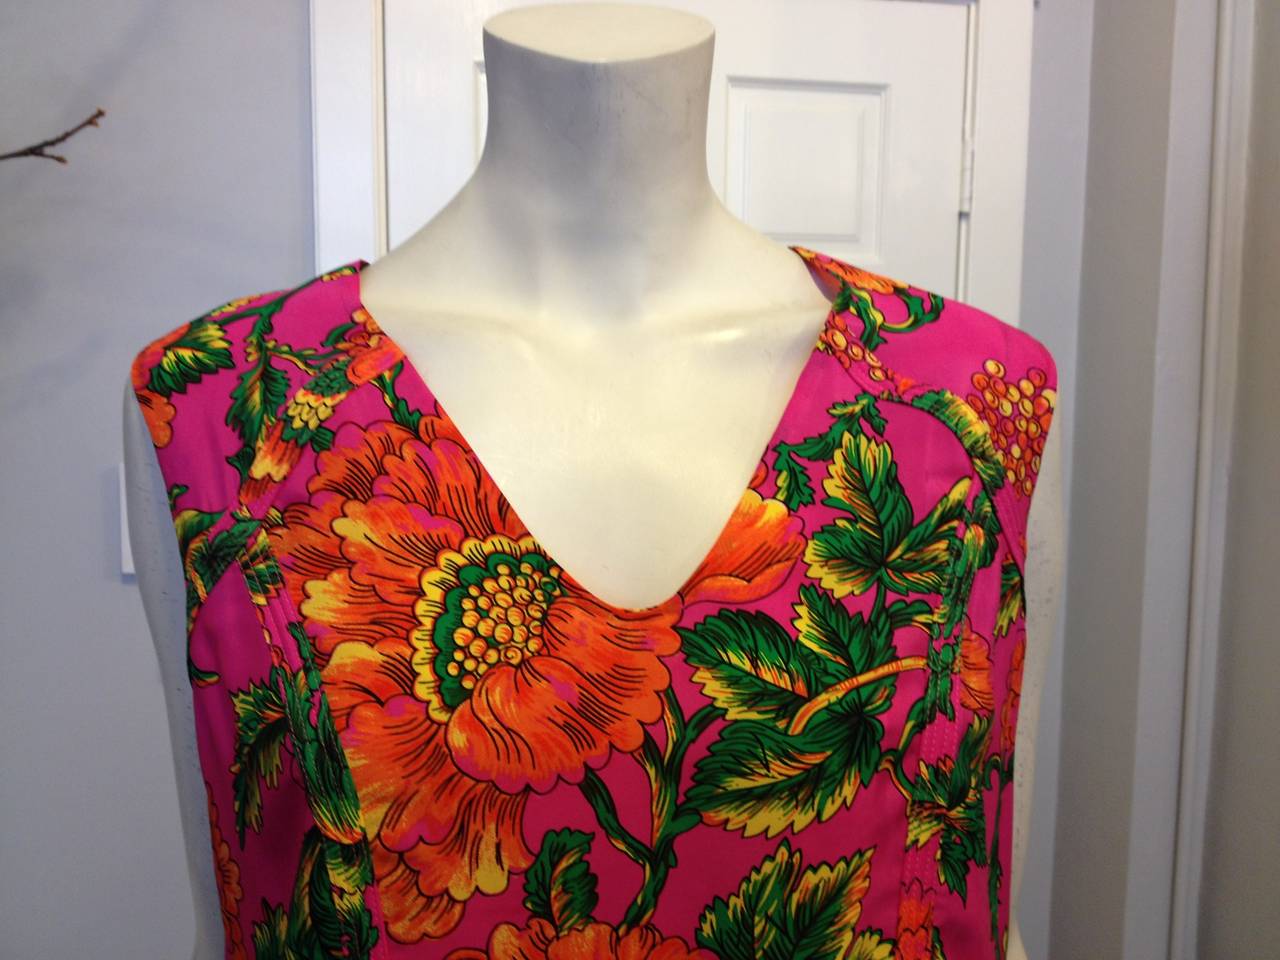 Bright and  vibrant, the carnation pattern decorating this Marni blouse is perfect for adding a splash of color to your look. Warm magenta, lively persimmon orange, and verdant green leaves contrast to create the perfect blend of color. Cut with